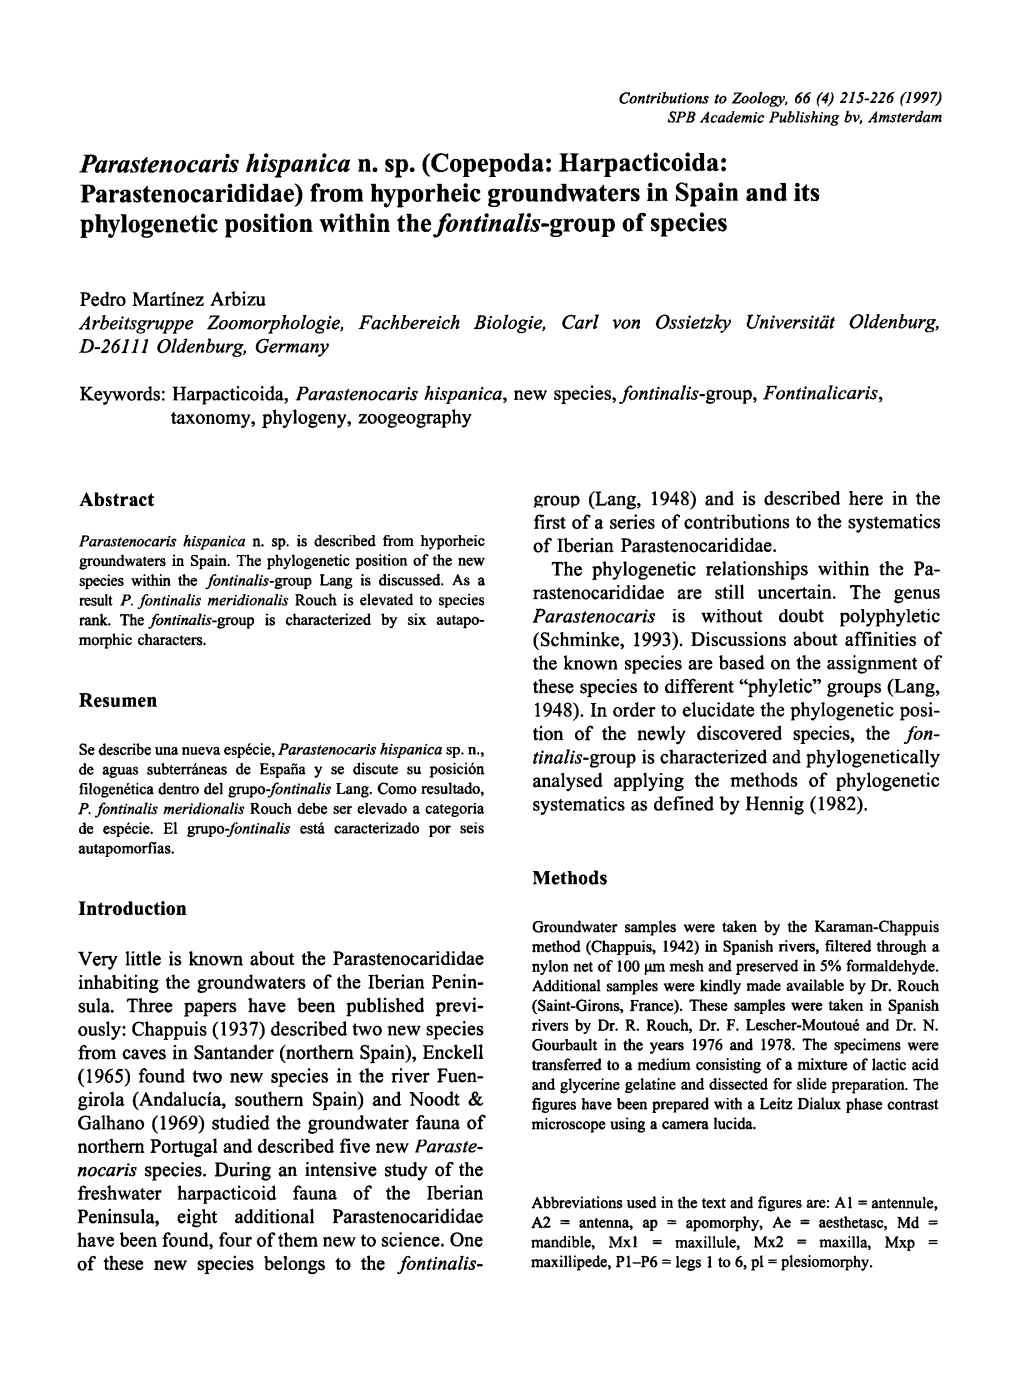 (Copepoda: Harpacticoida: Parastenocarididae) from Hyporheic Groundwaters in Spain and Phylogenetic Position